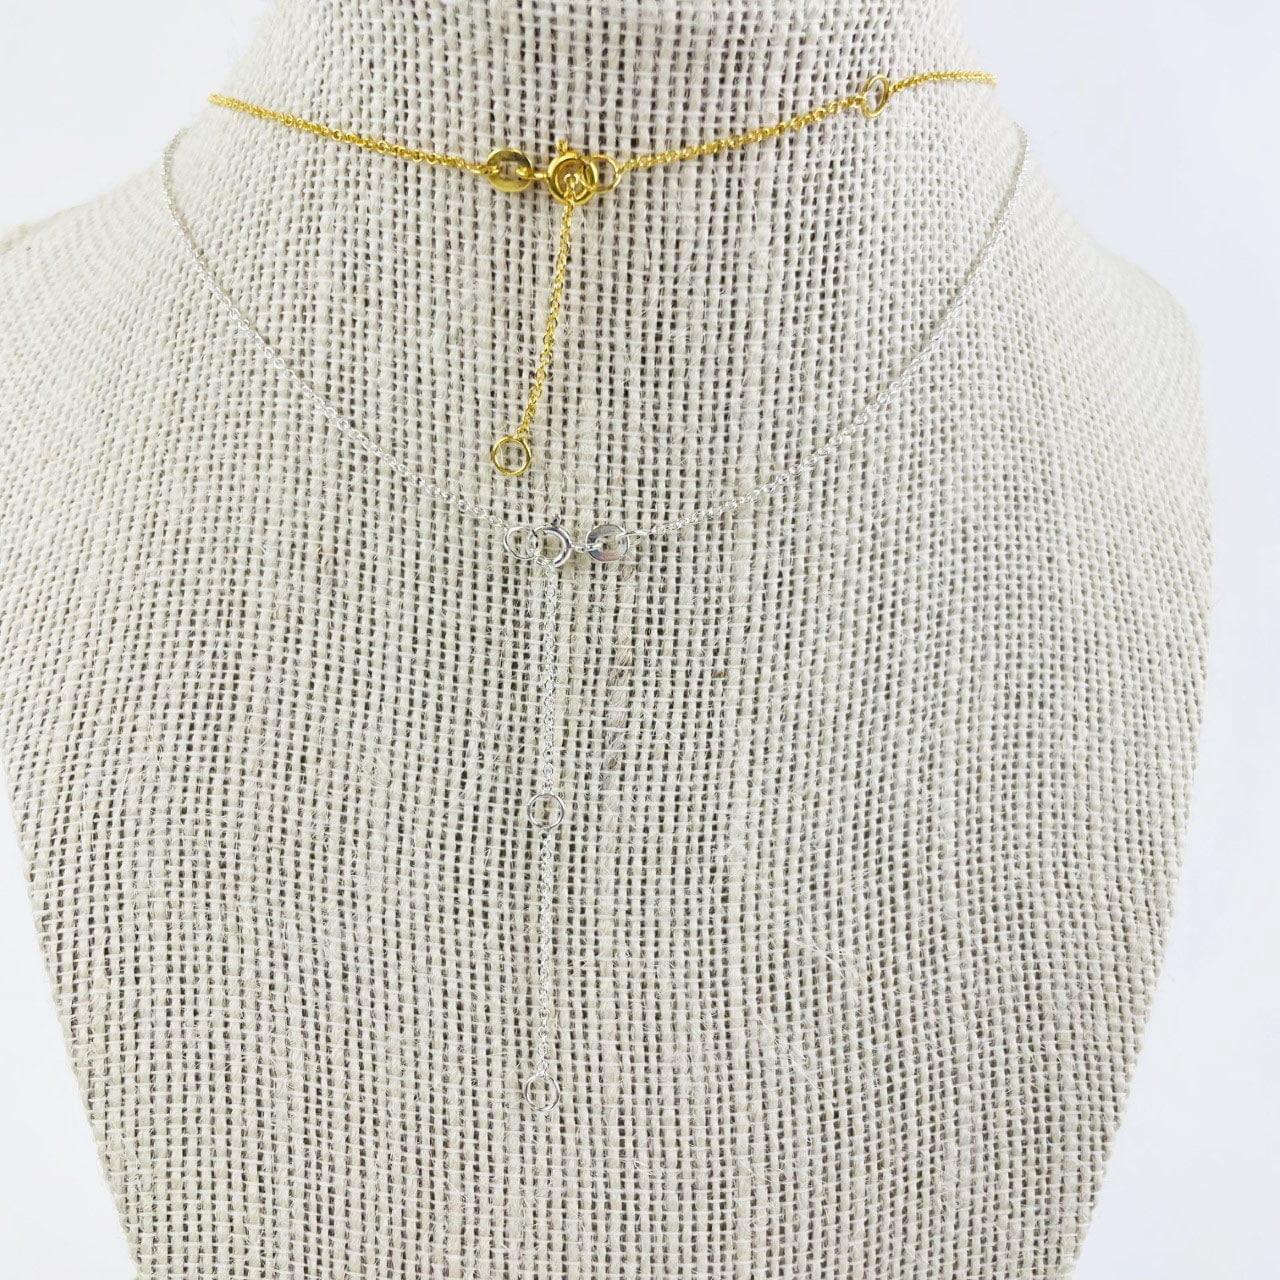 gold and silver necklace from back showing clasps